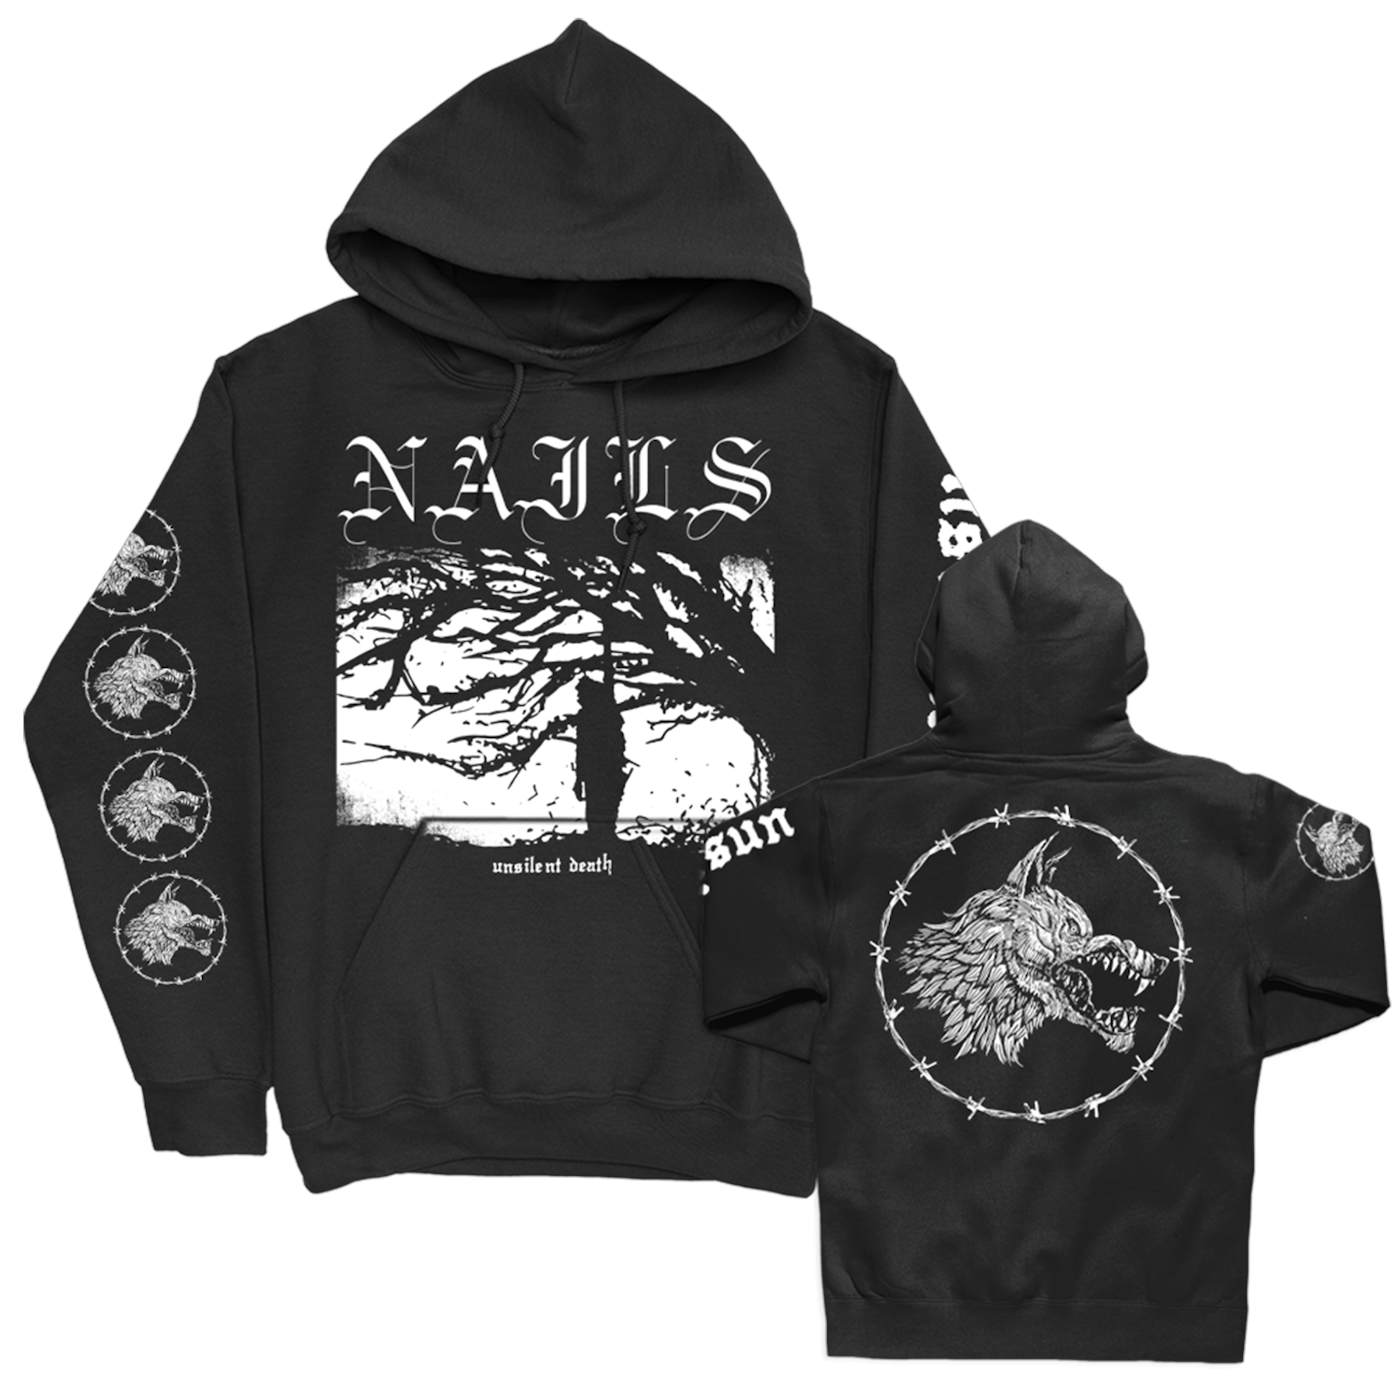 Nails Unsilent Death Pullover Hoodie (Black)